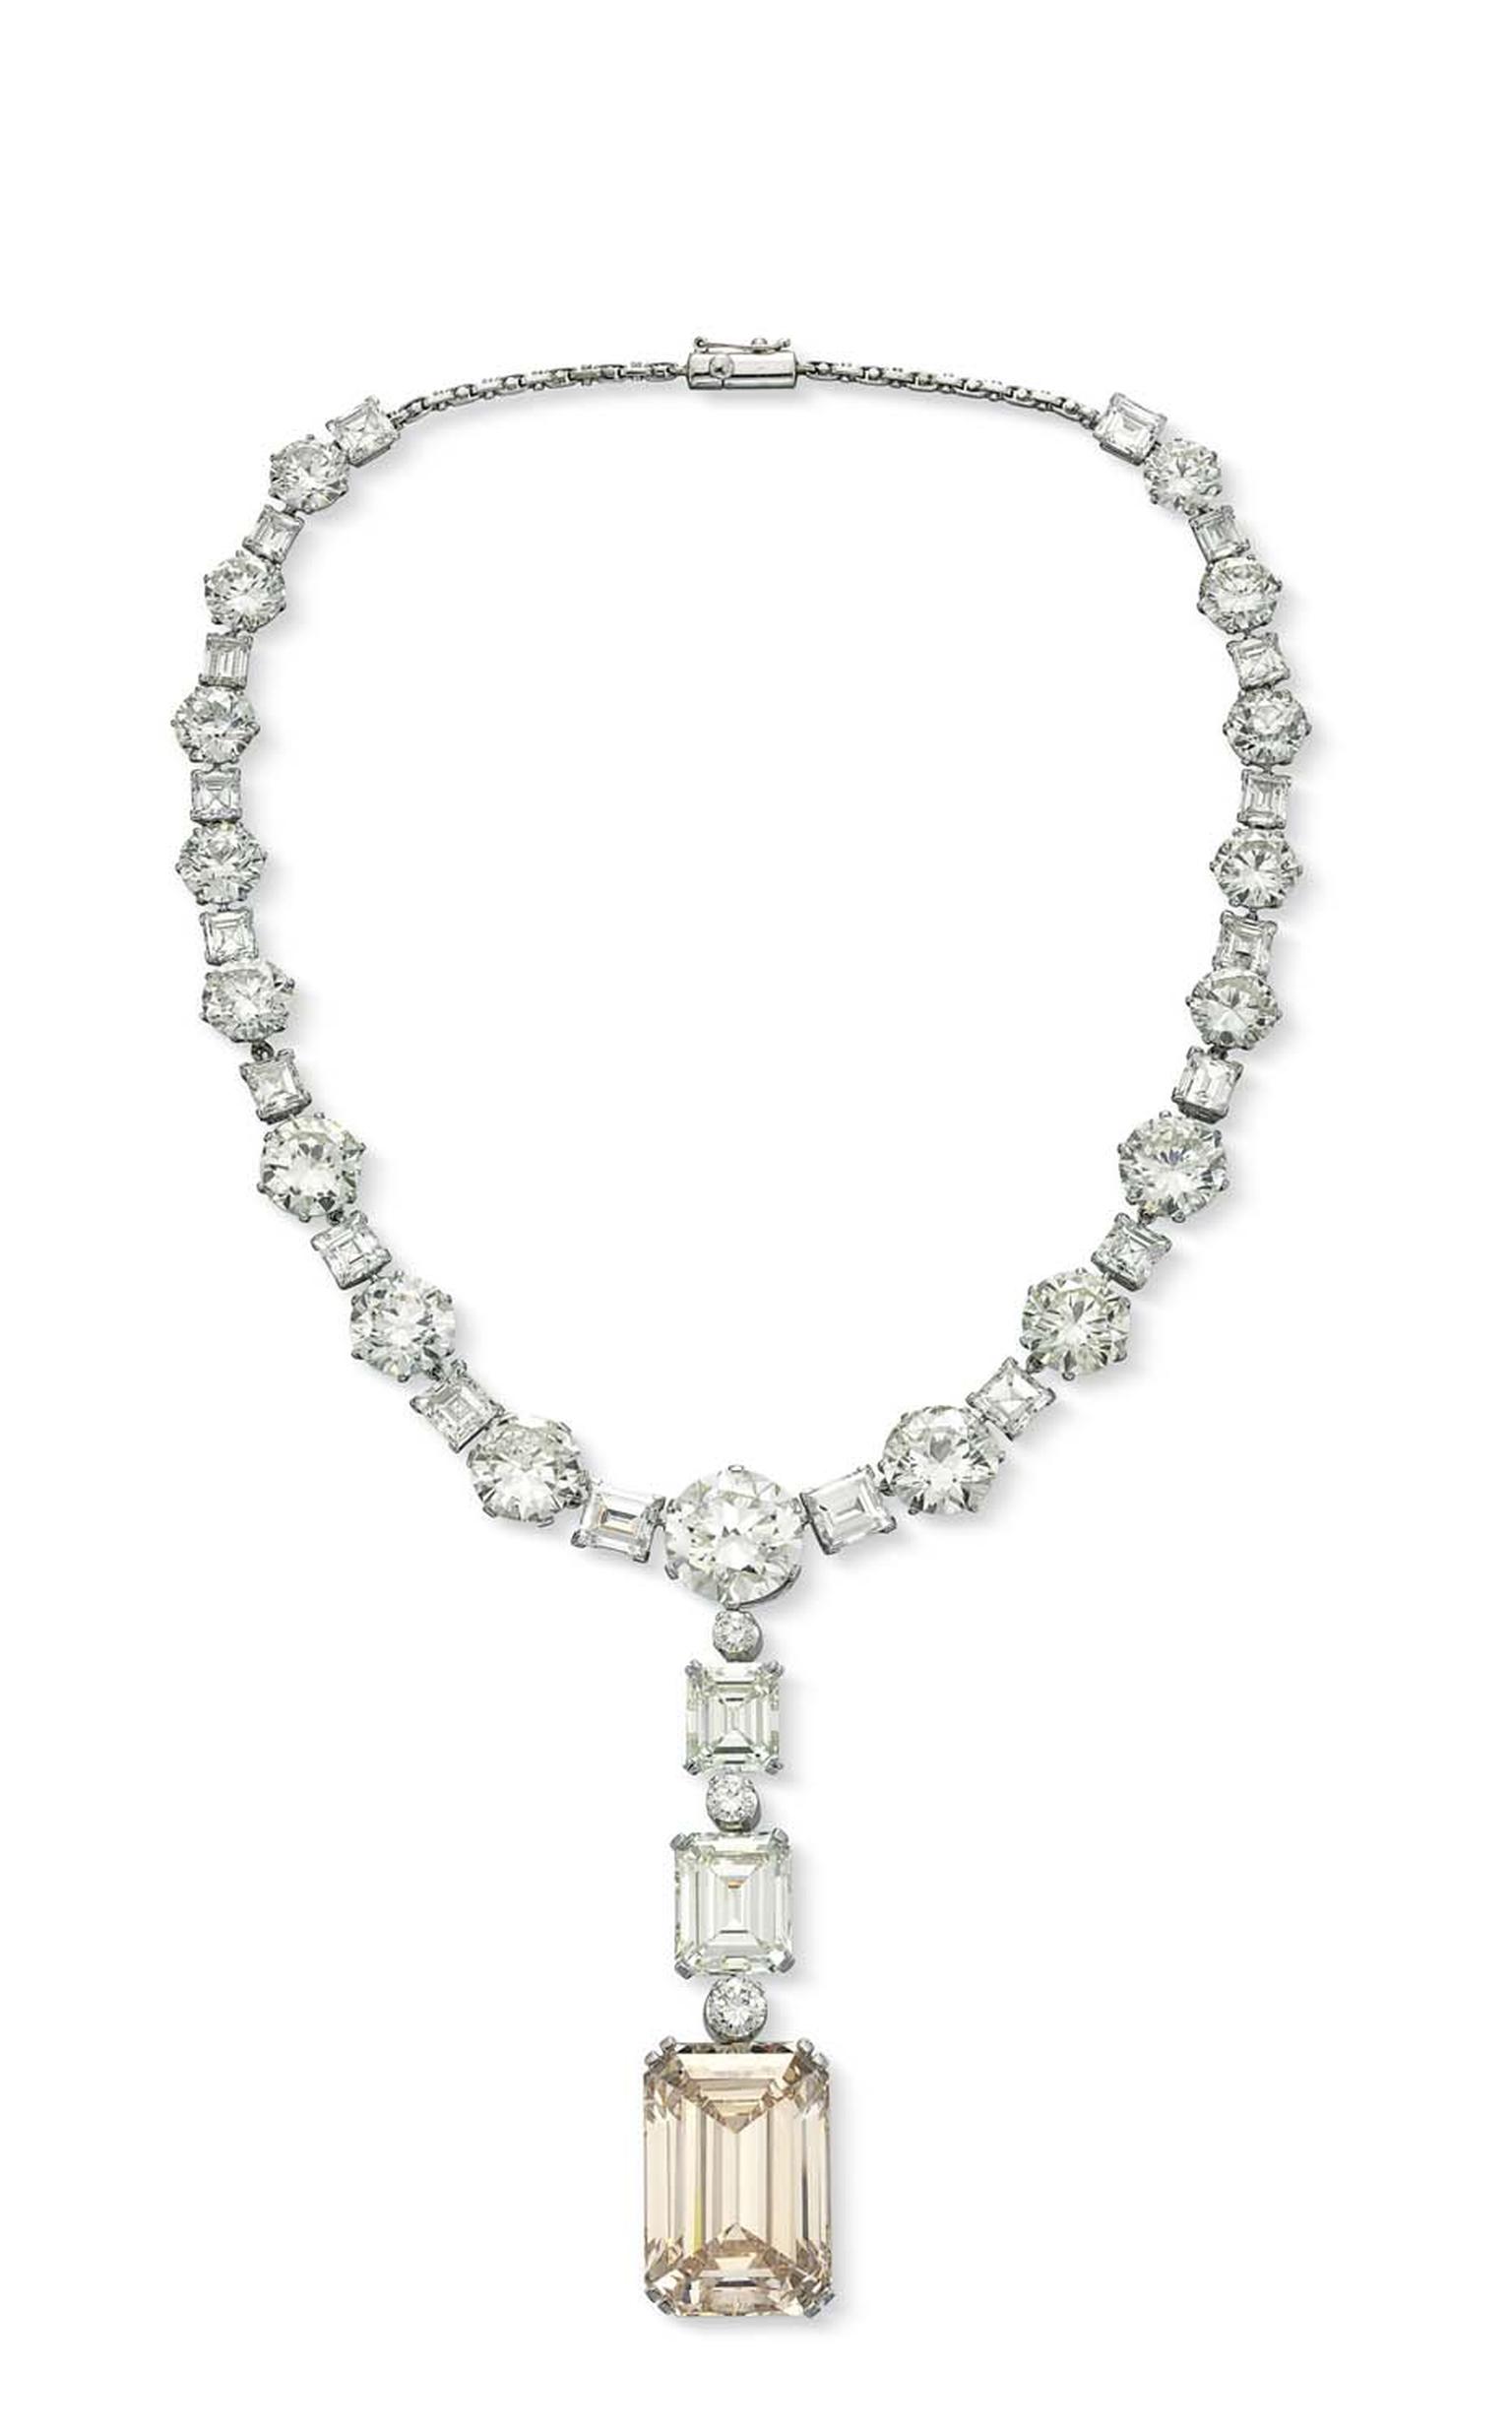 Featuring a 81.38ct rectangular-cut, potentially Internally Flawless Diamond this necklace - the top lot at Christie’s sale of Important Jewels, outperformed its pre-sale estimate of US$2.8 million, selling for a lofty $3.189 million.